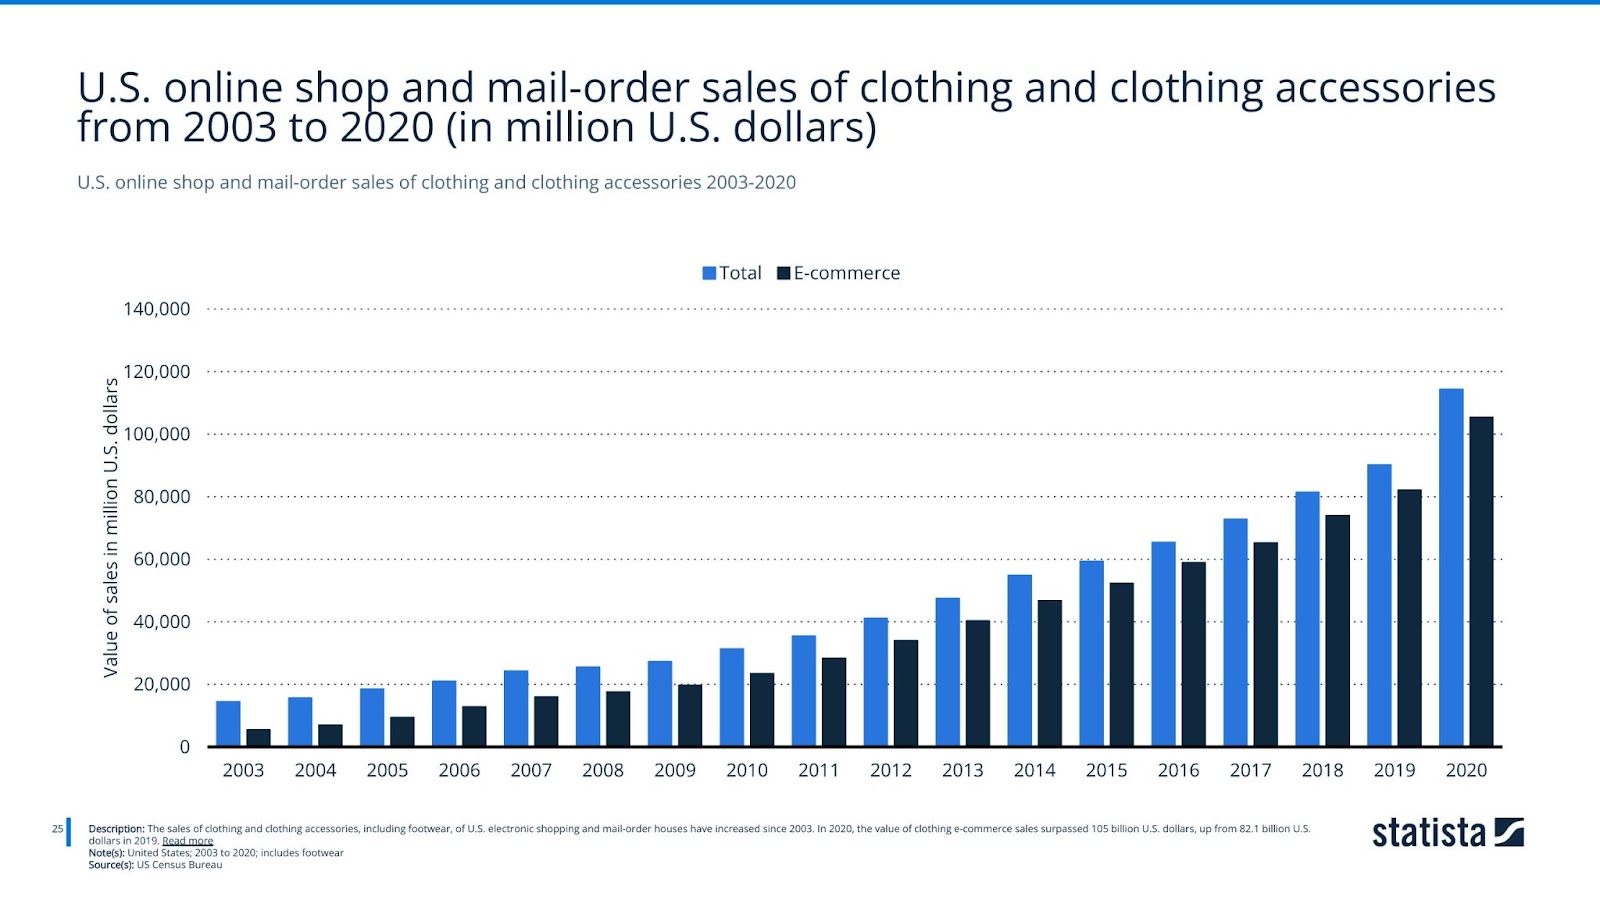 U.S. online shop and mail-order sales of clothing and clothing accessories 2003-2020